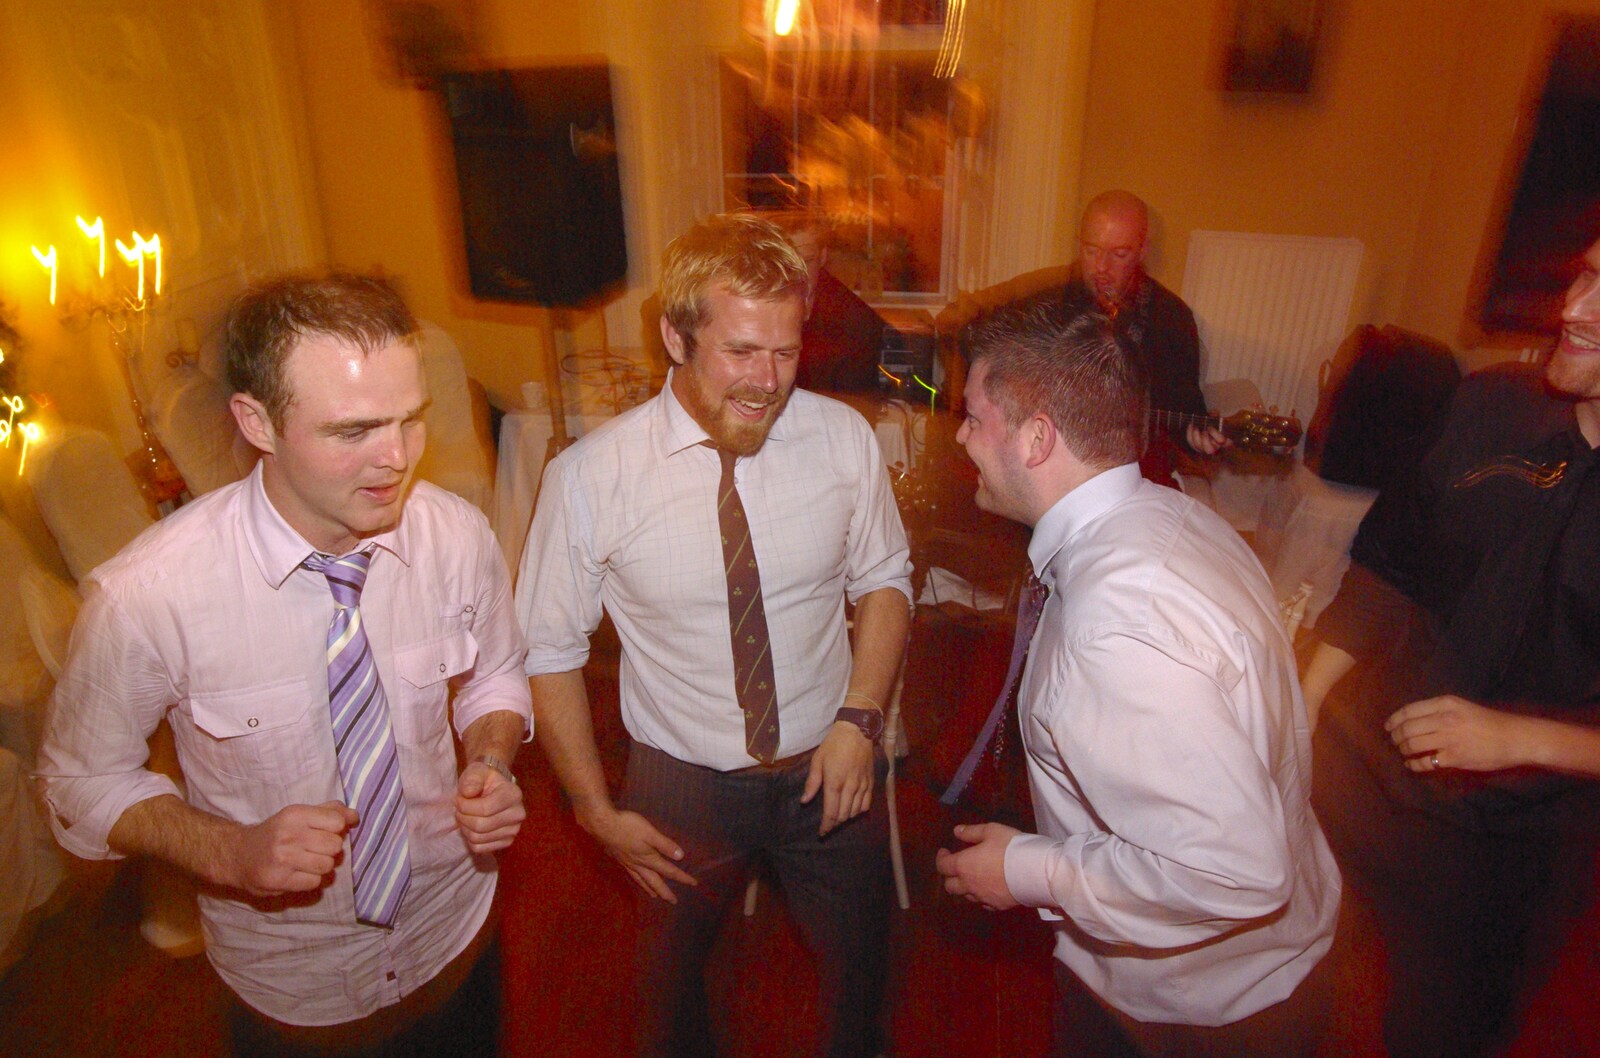 More dancing from Julie and Cameron's Wedding, Ballintaggart House, Dingle - 24th July 2009